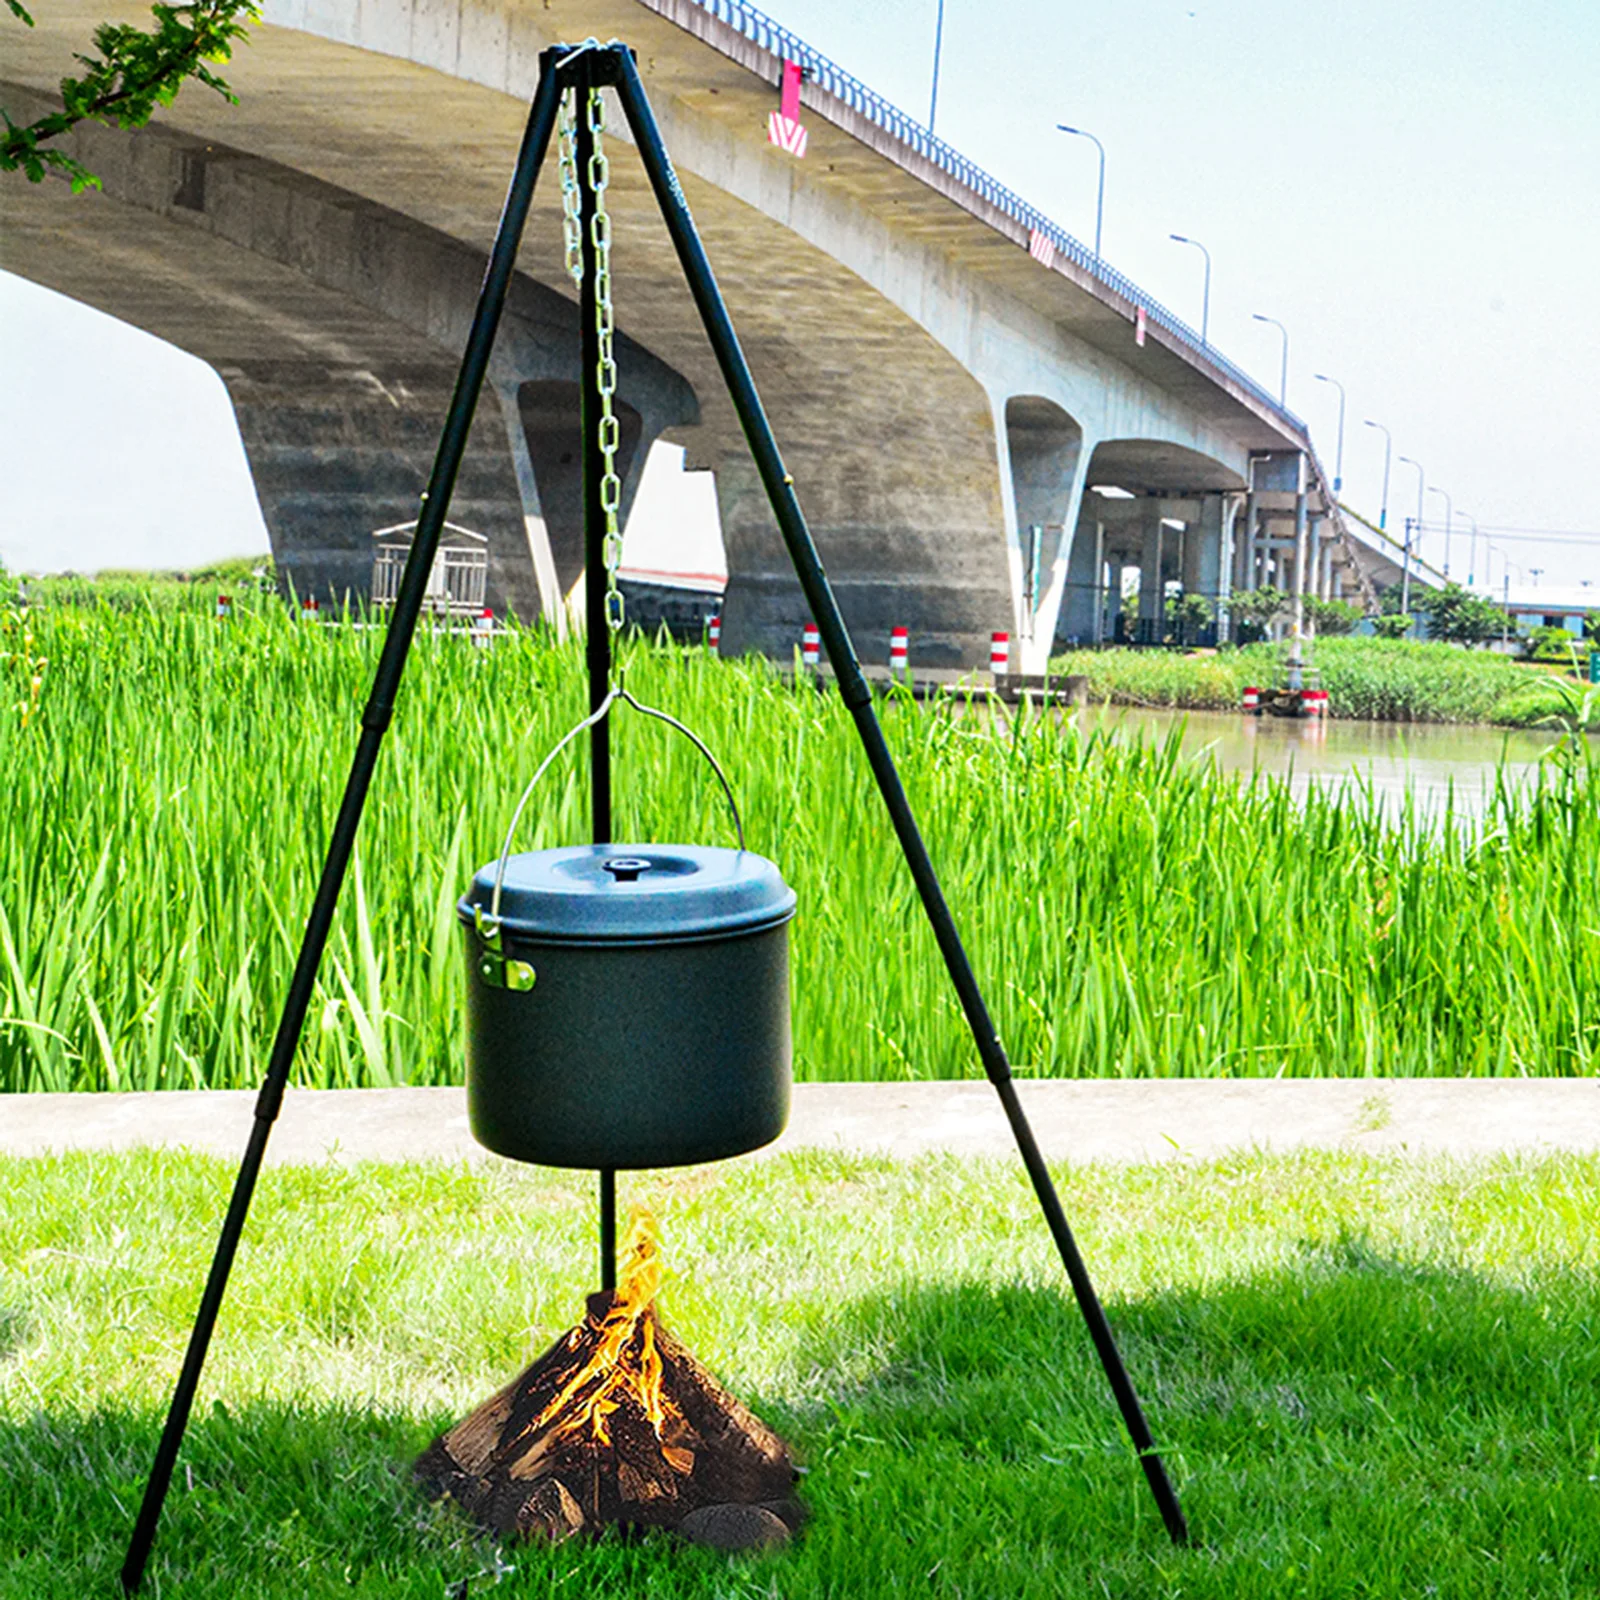 Grill Camping Tripod Portable Outdoor Cooking Tripod with  Chain for Campfire Picnic ing Pot Stand Fishing Cookware